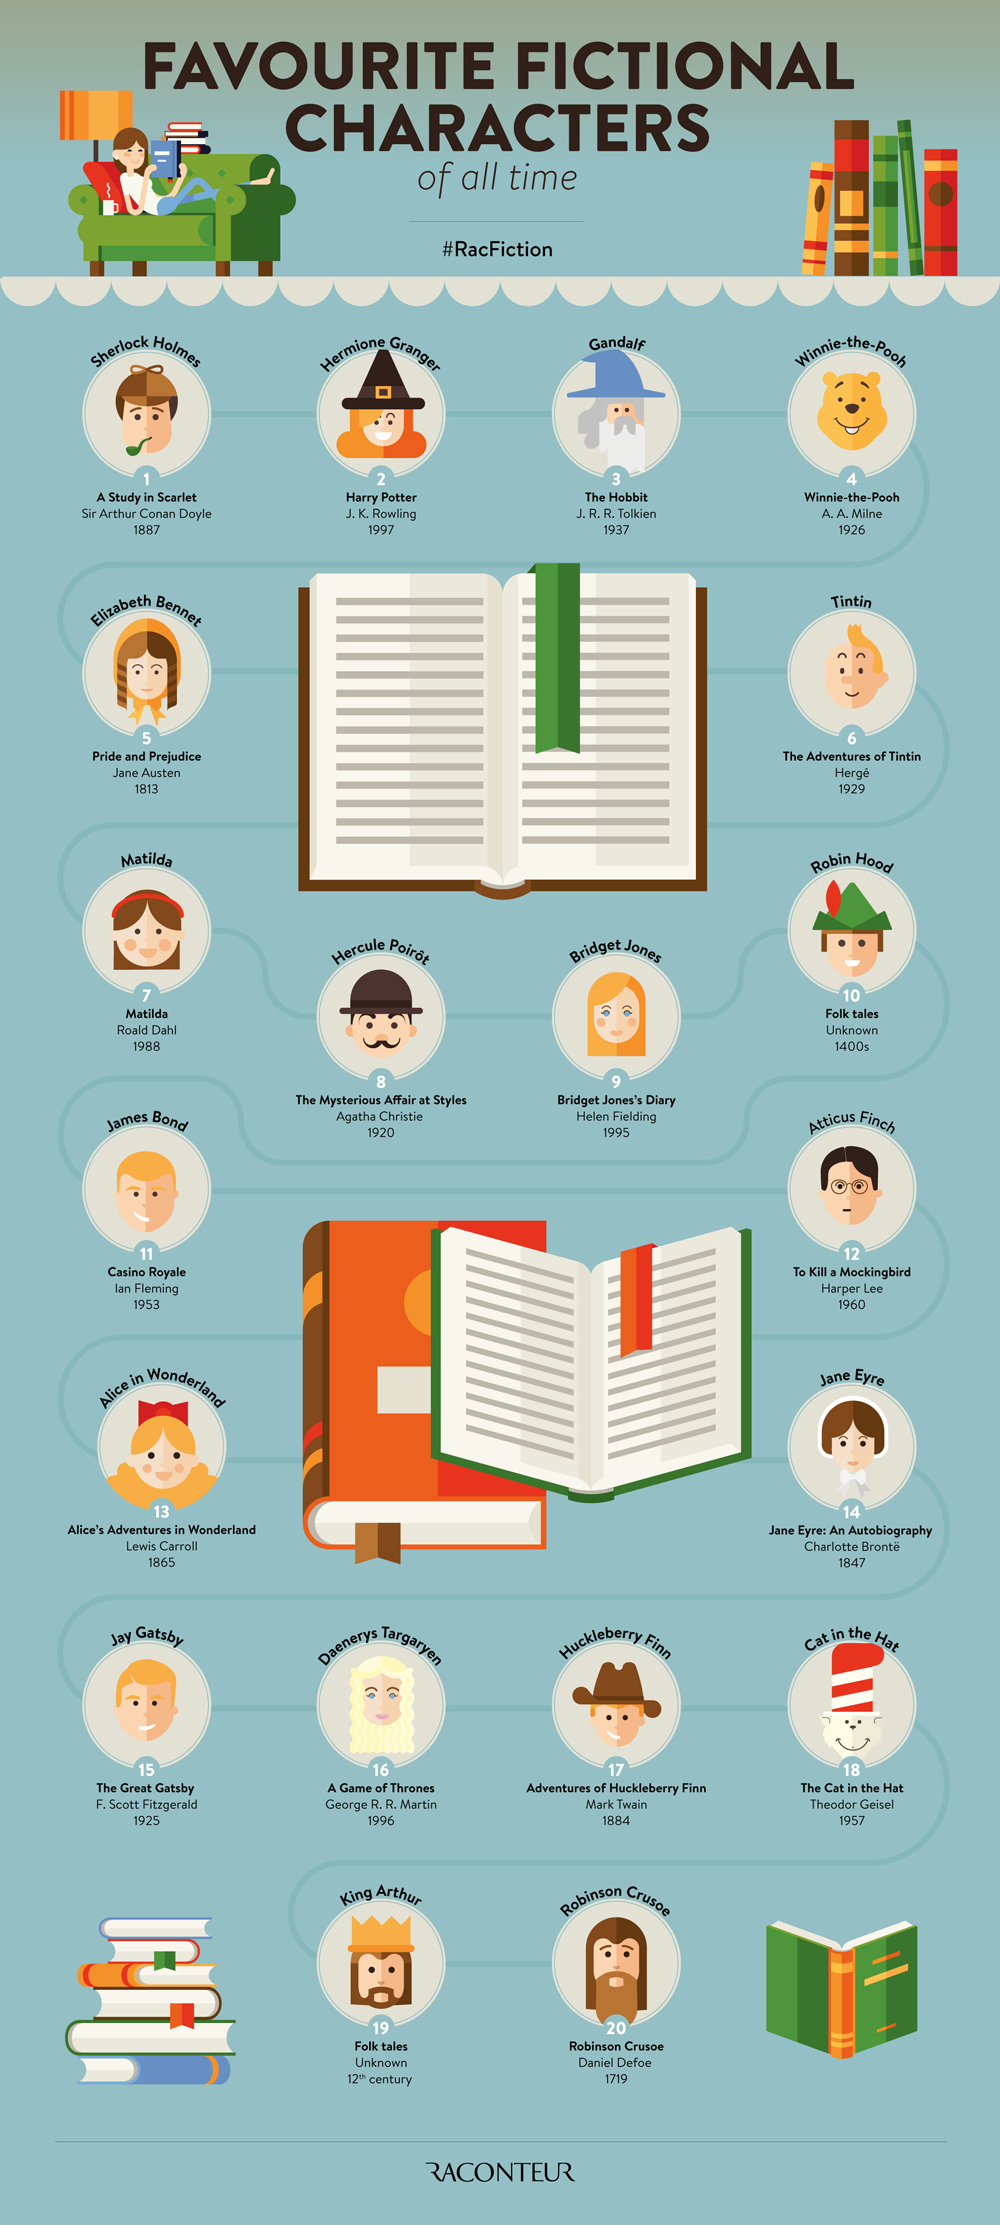 Favourite fictional characters of all time infographic